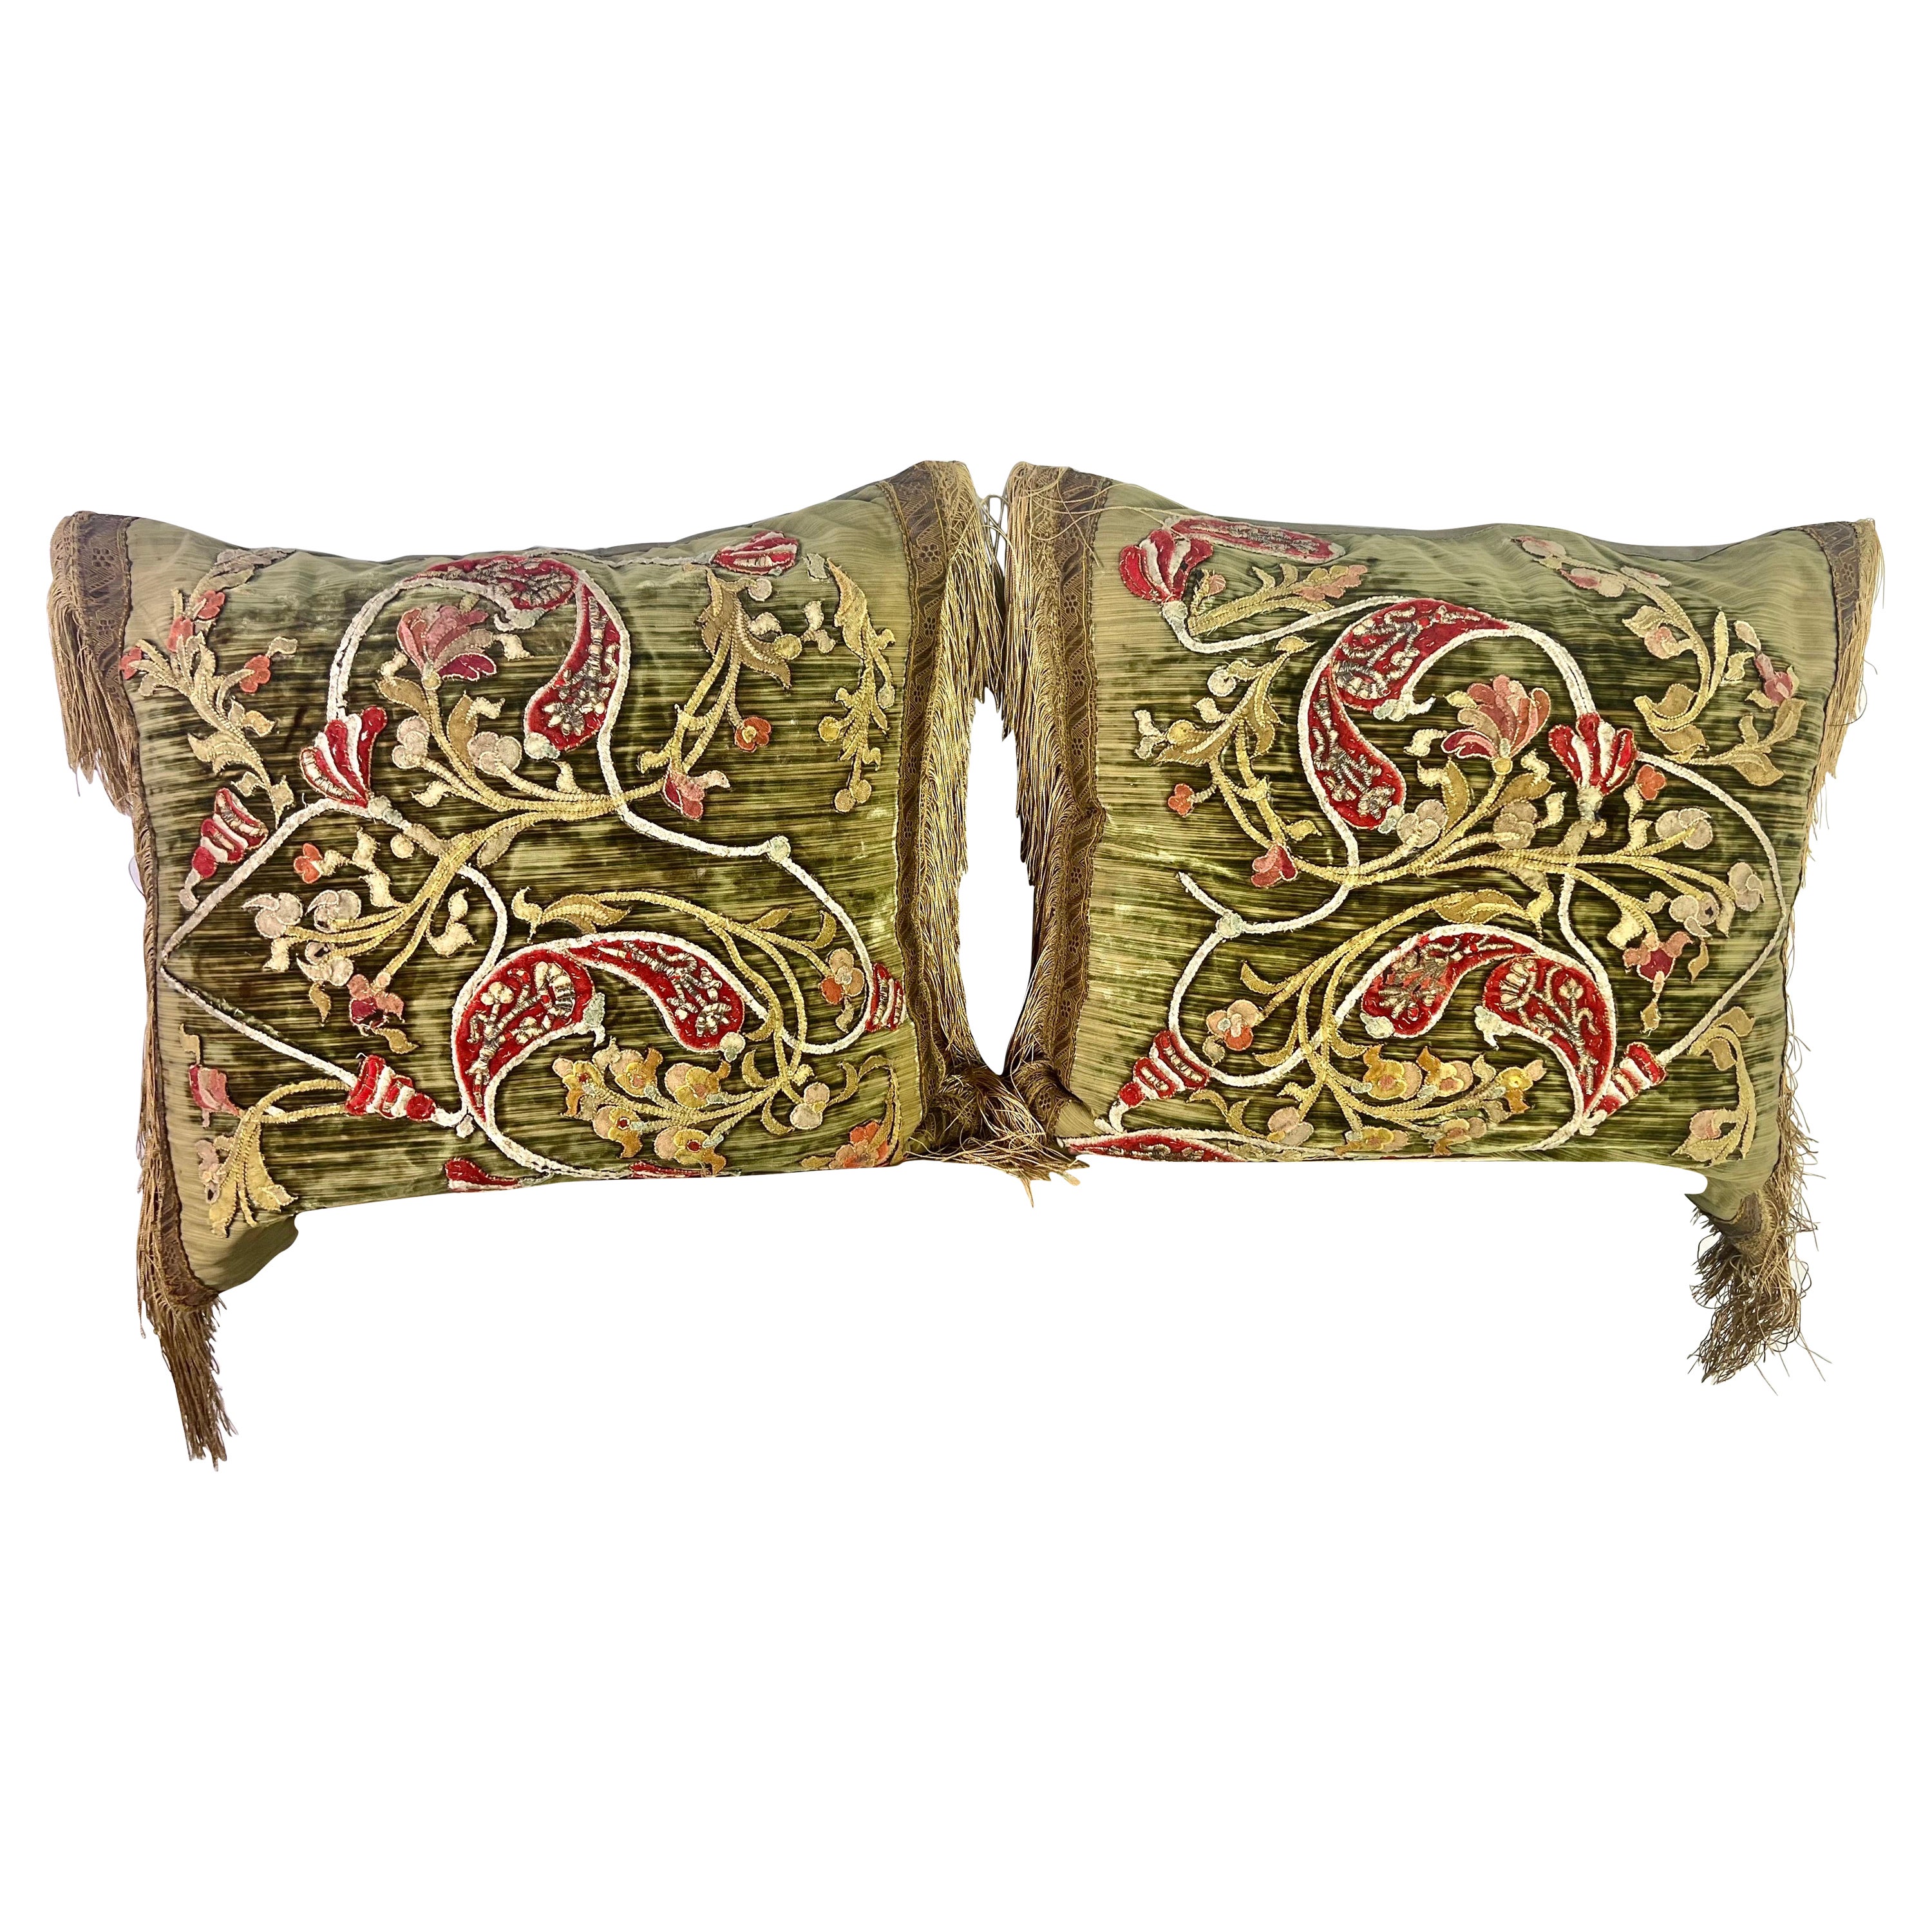 Pair of Custom Pillows w/ 18th C. Textile Fronts